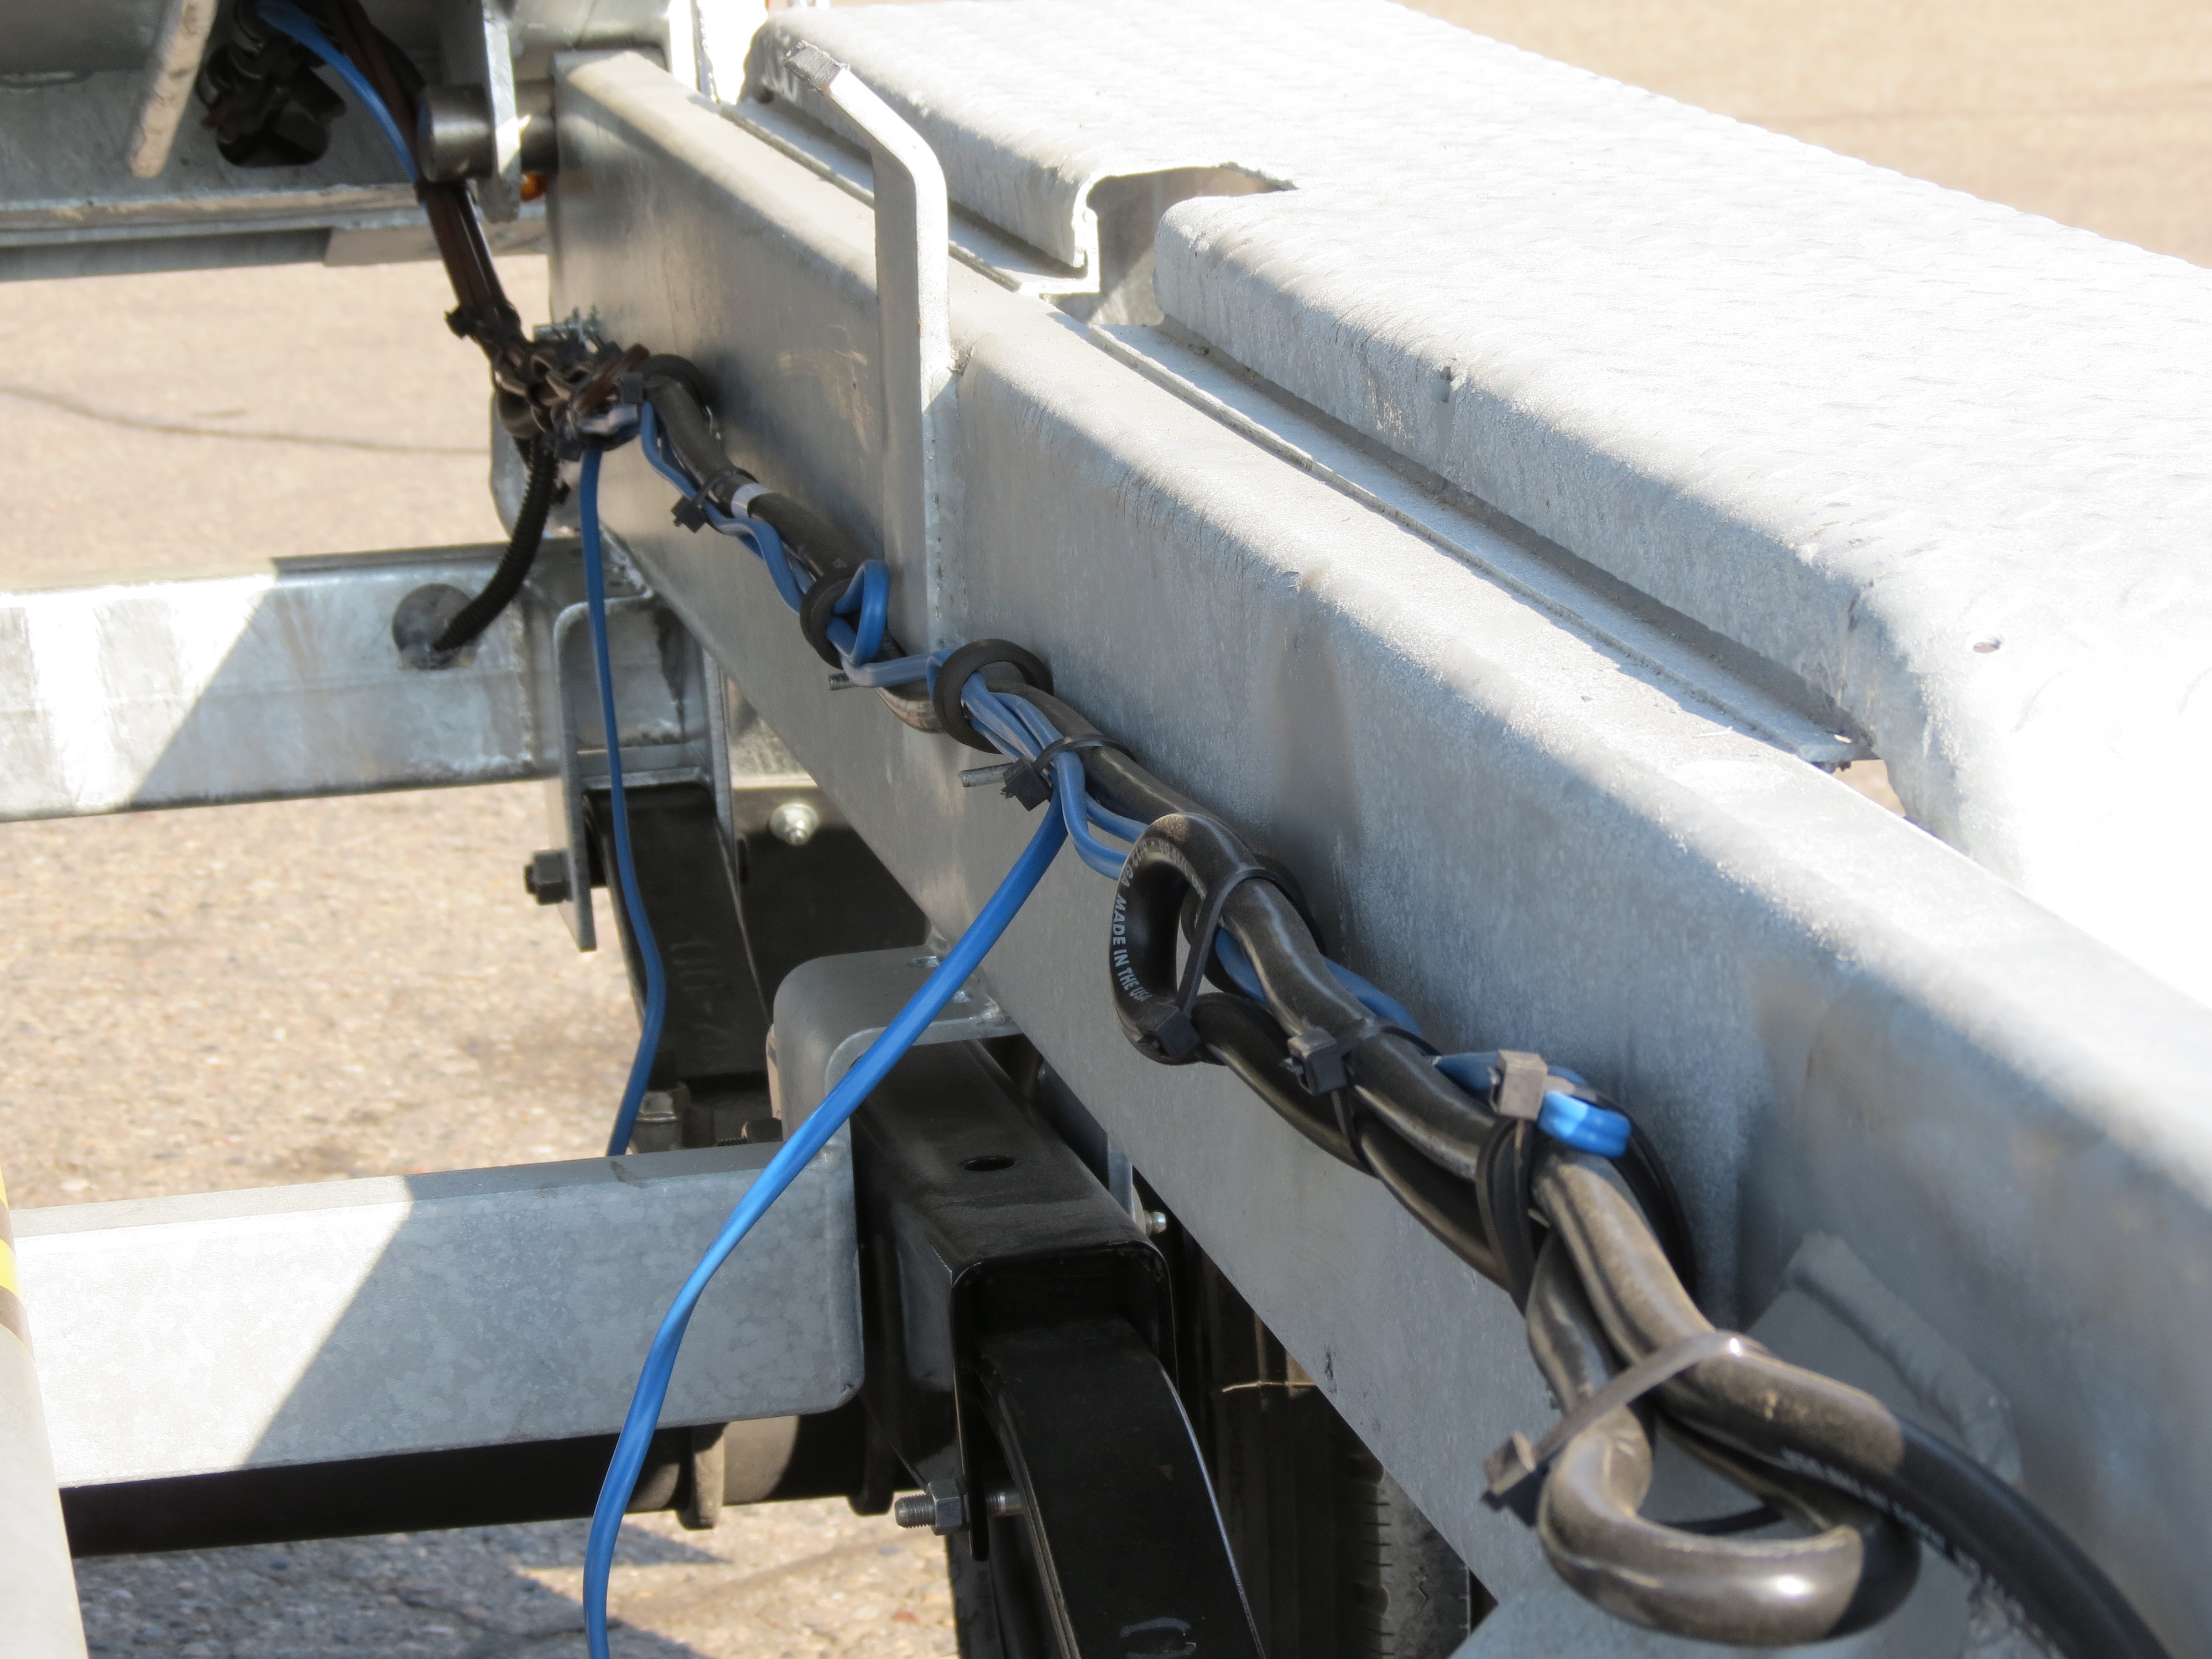 Trailer Wiring And Lighting Troubleshooting And Maintenance